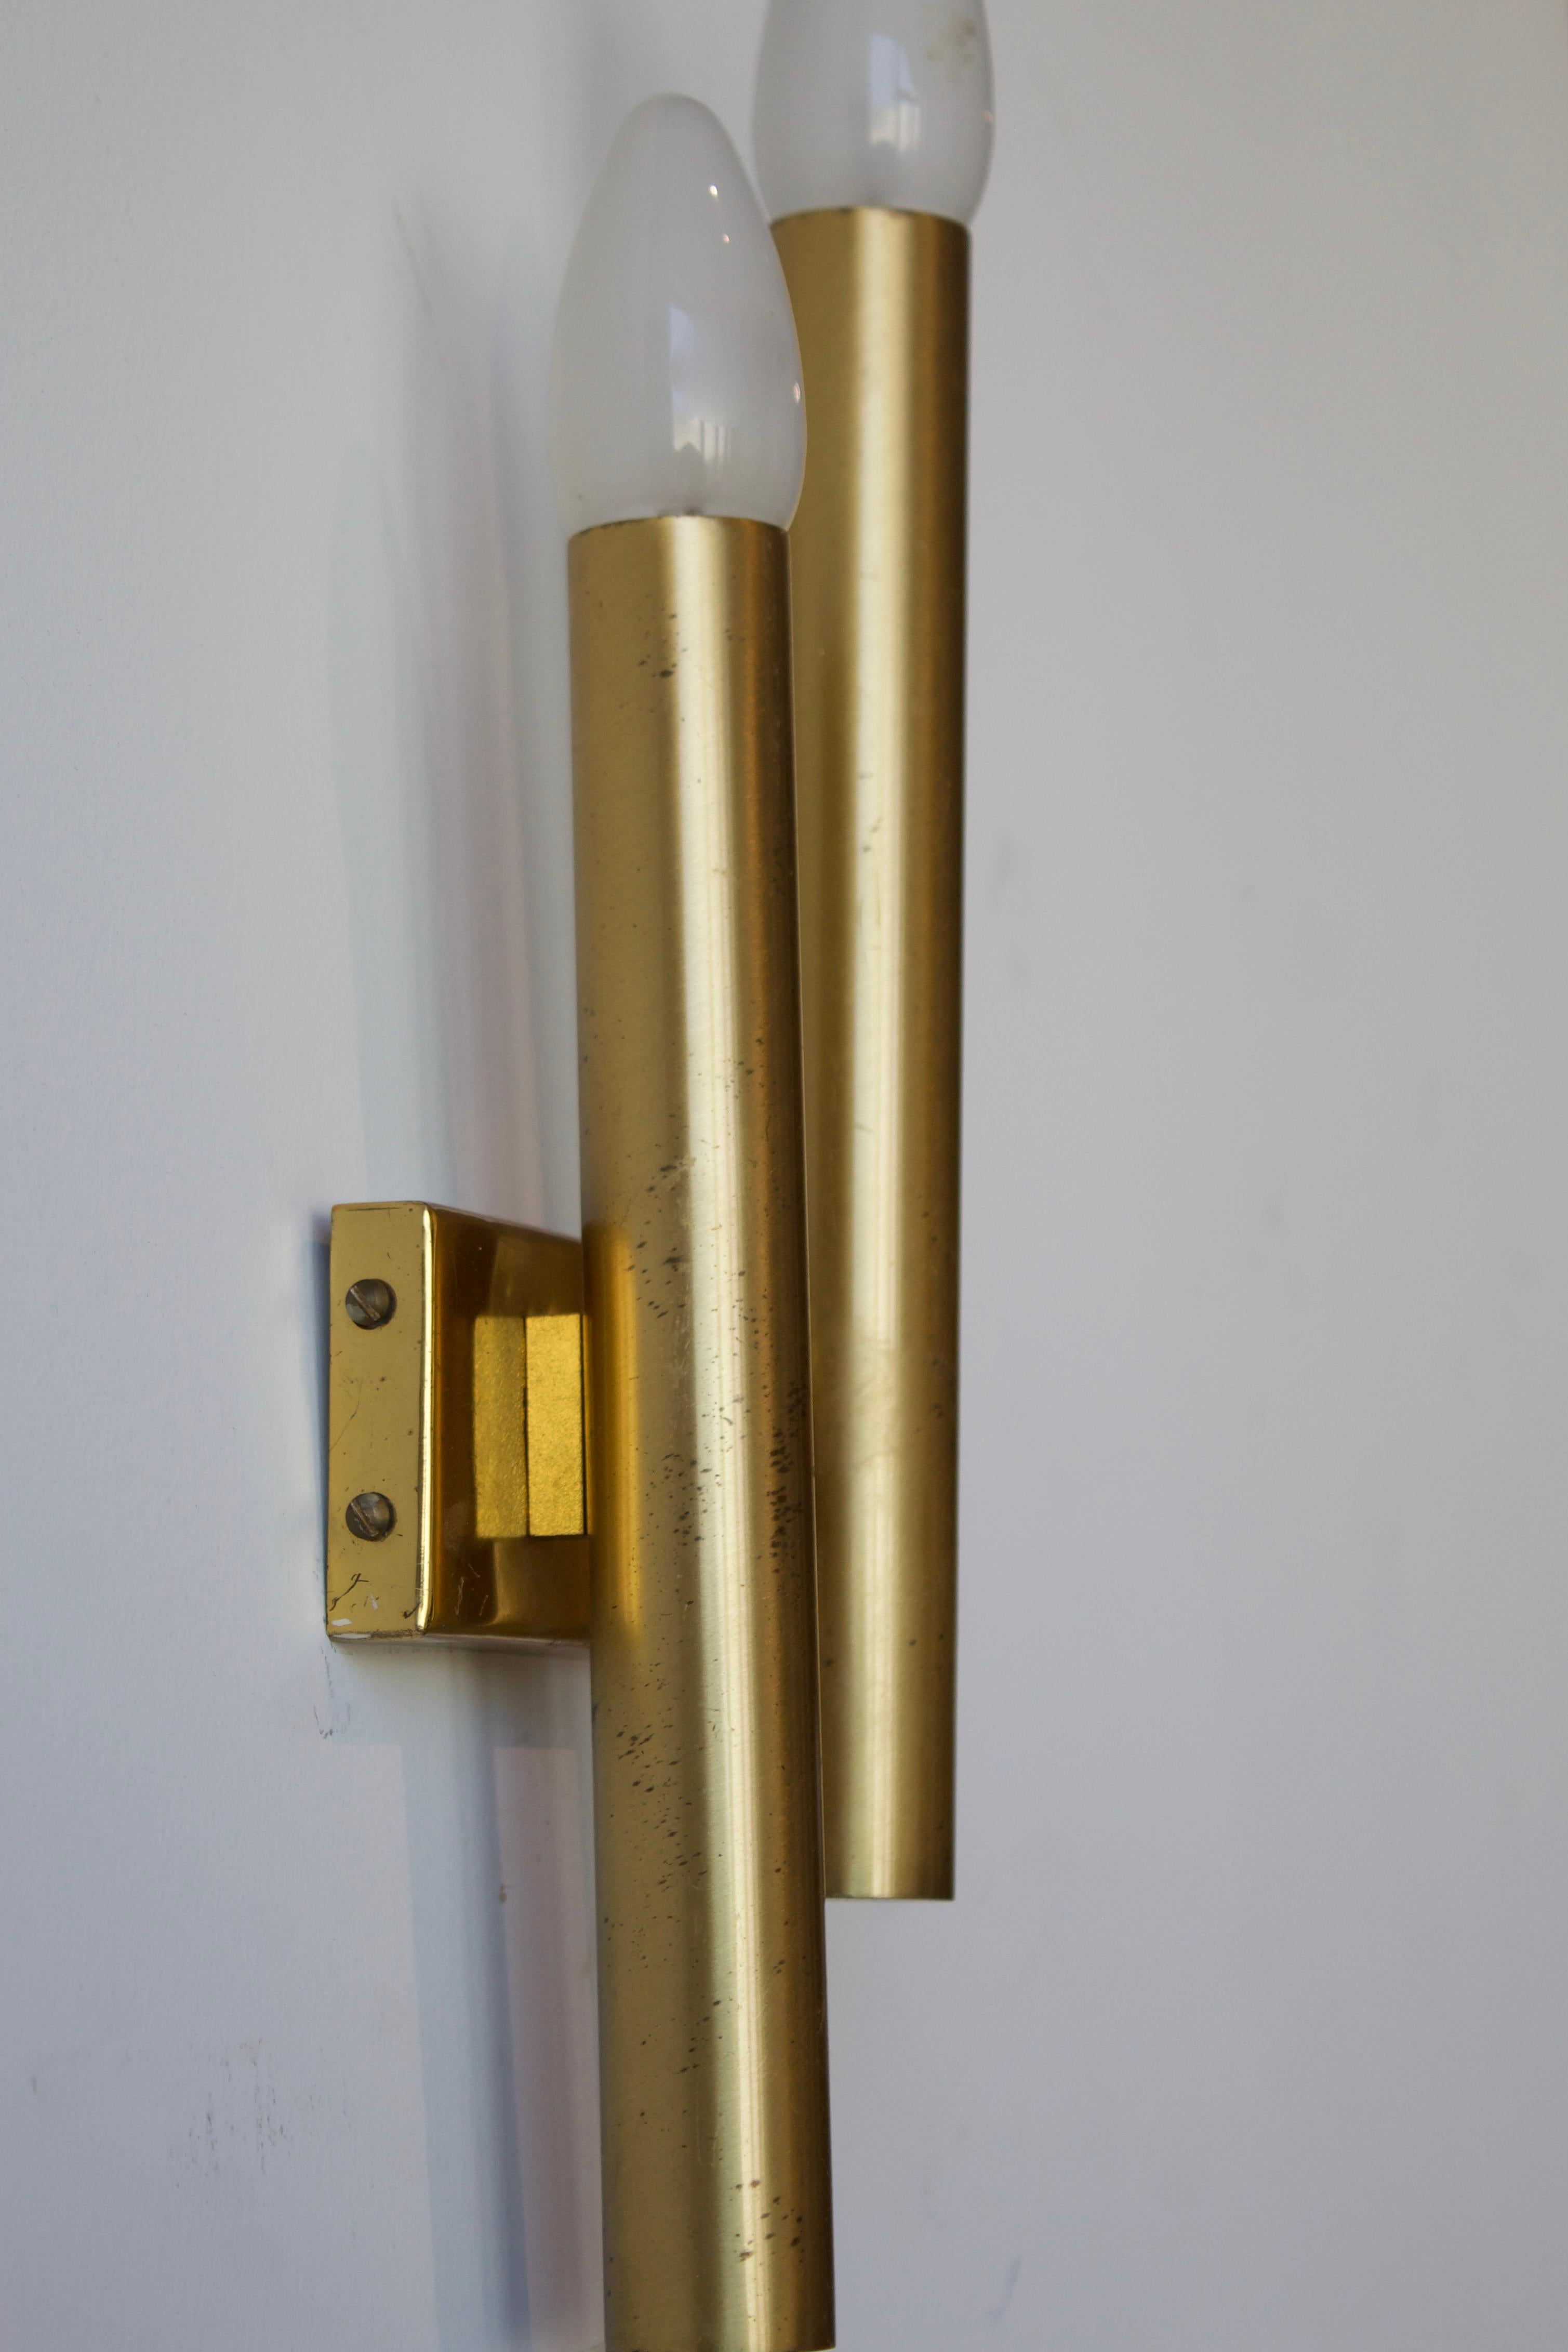 Italian Candle, Two-Armed Wall Lights / Sconces, Brass, Italy, 1960s